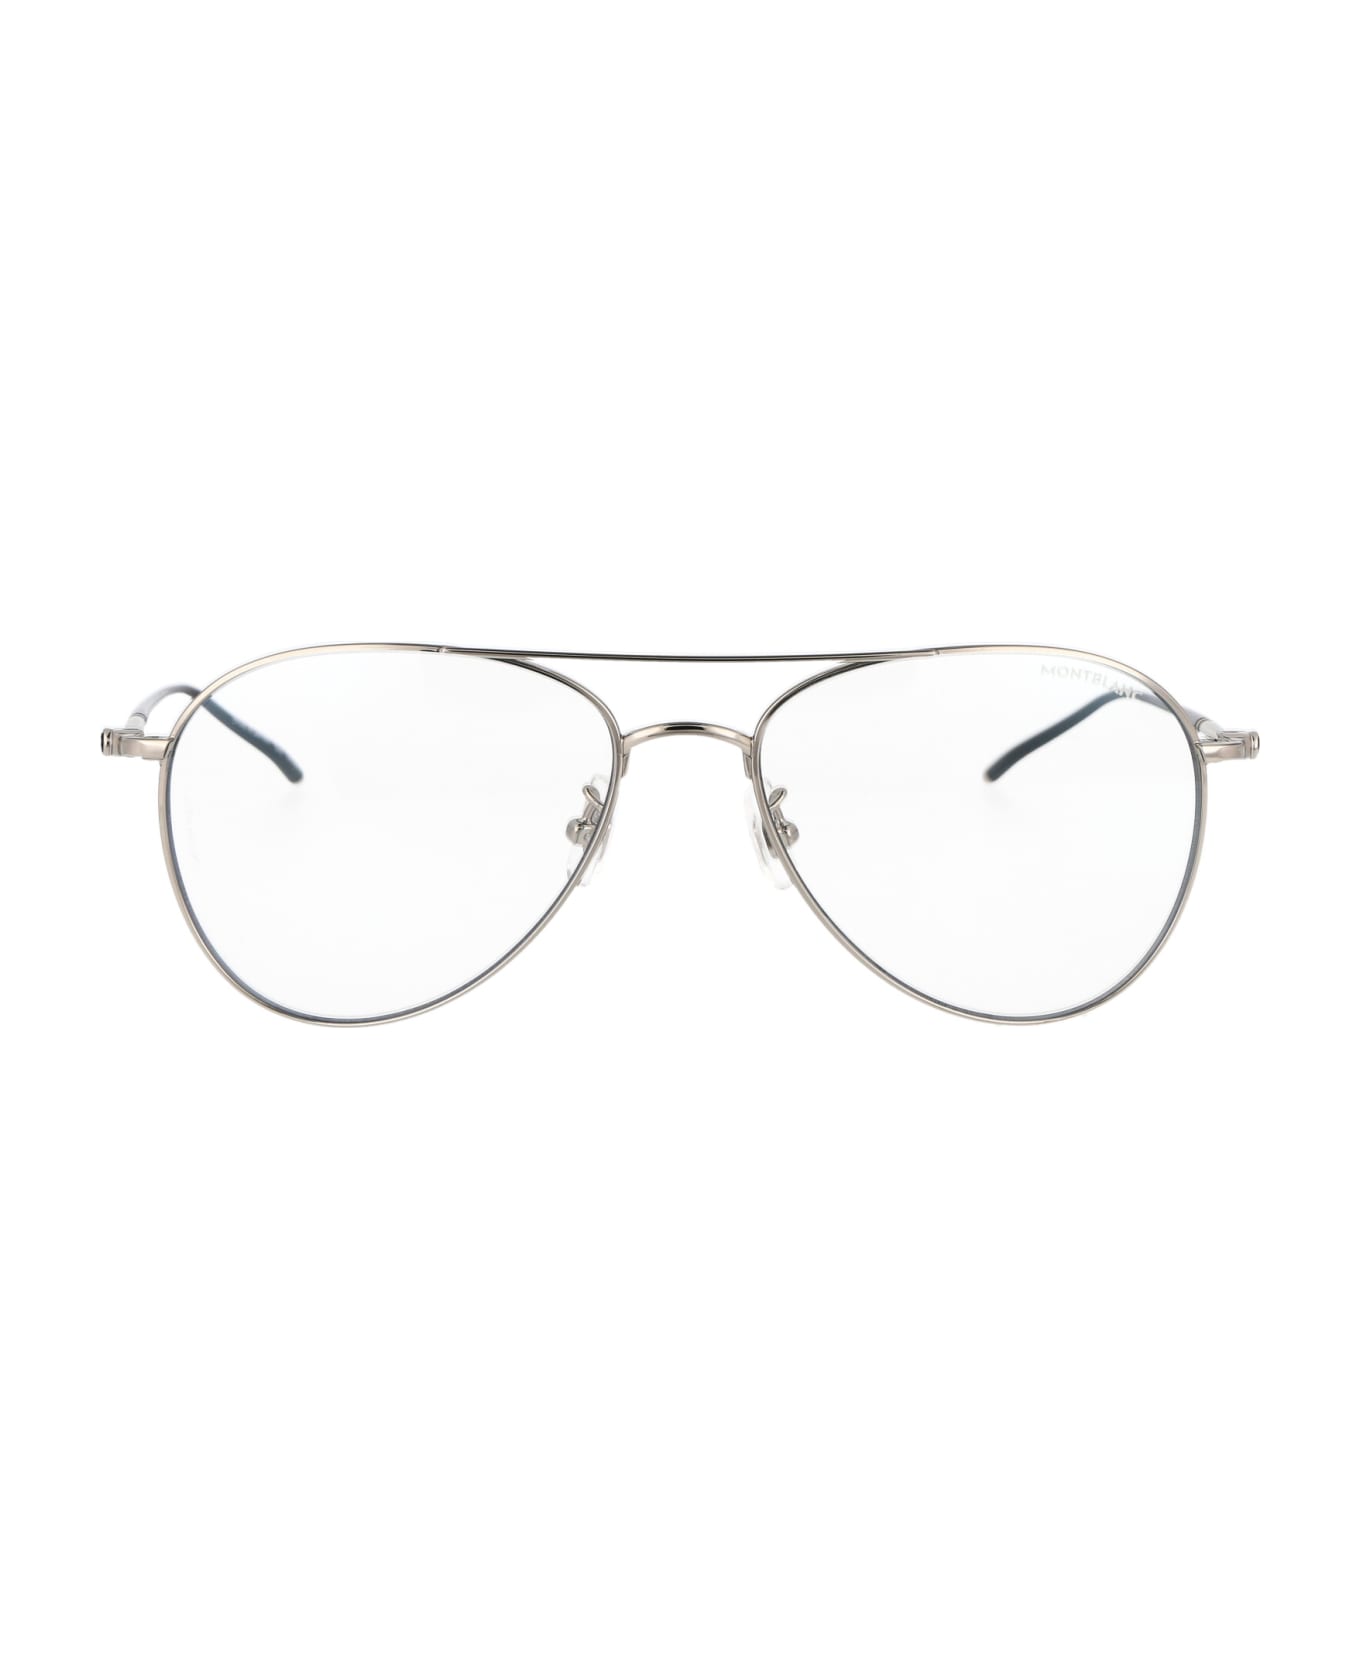 Montblanc Mb0128s Sunglasses - 009 SILVER SILVER TRANSPARENT